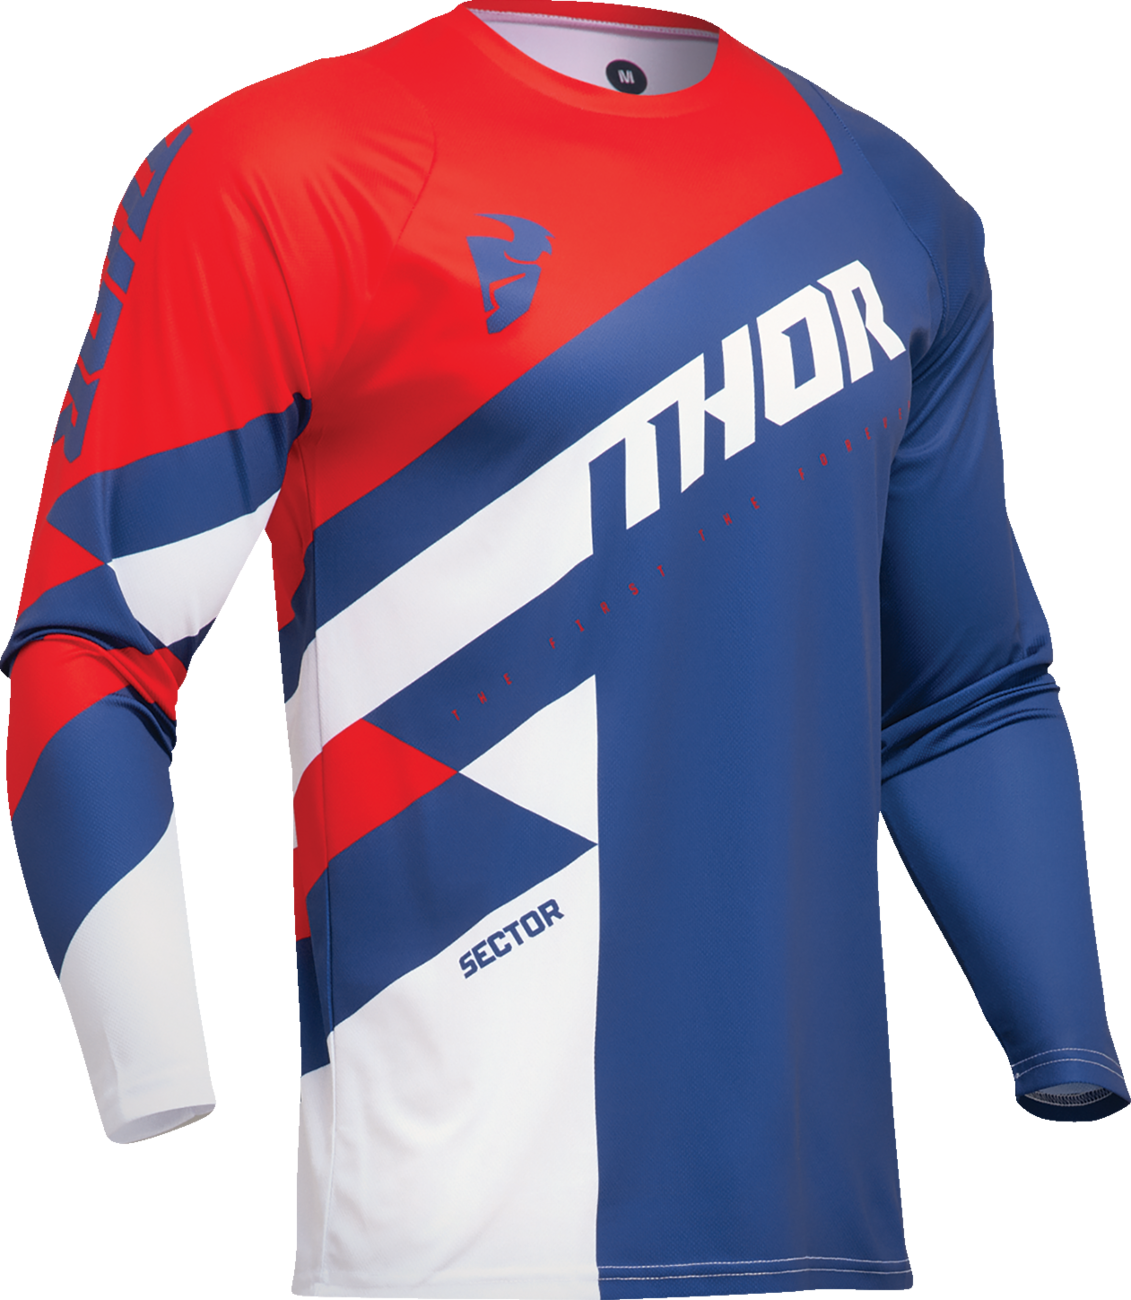 THOR Sector Checker Jersey - Navy/Red - Small 2910-7603